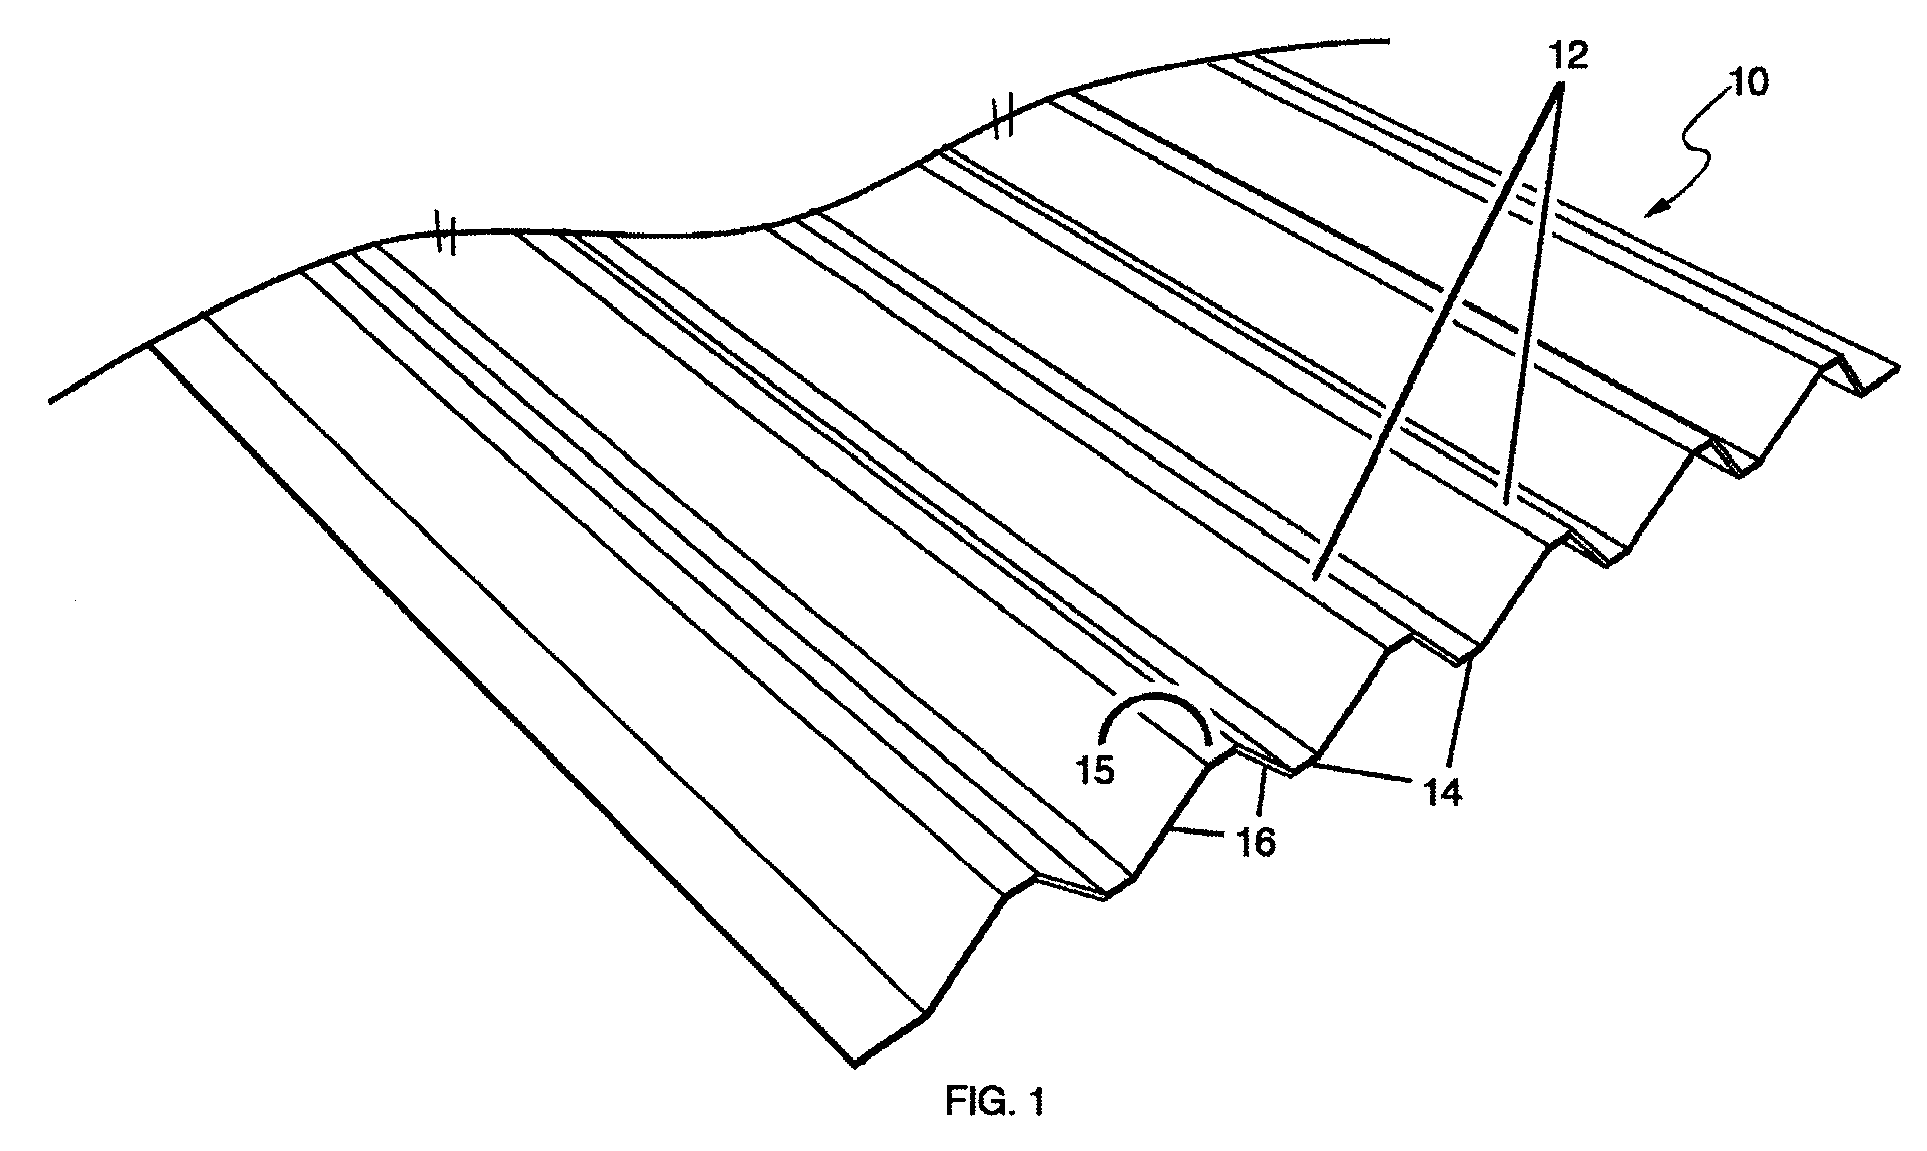 Engineered Molded Fiberboard Panels and Methods of Making and Using the Same